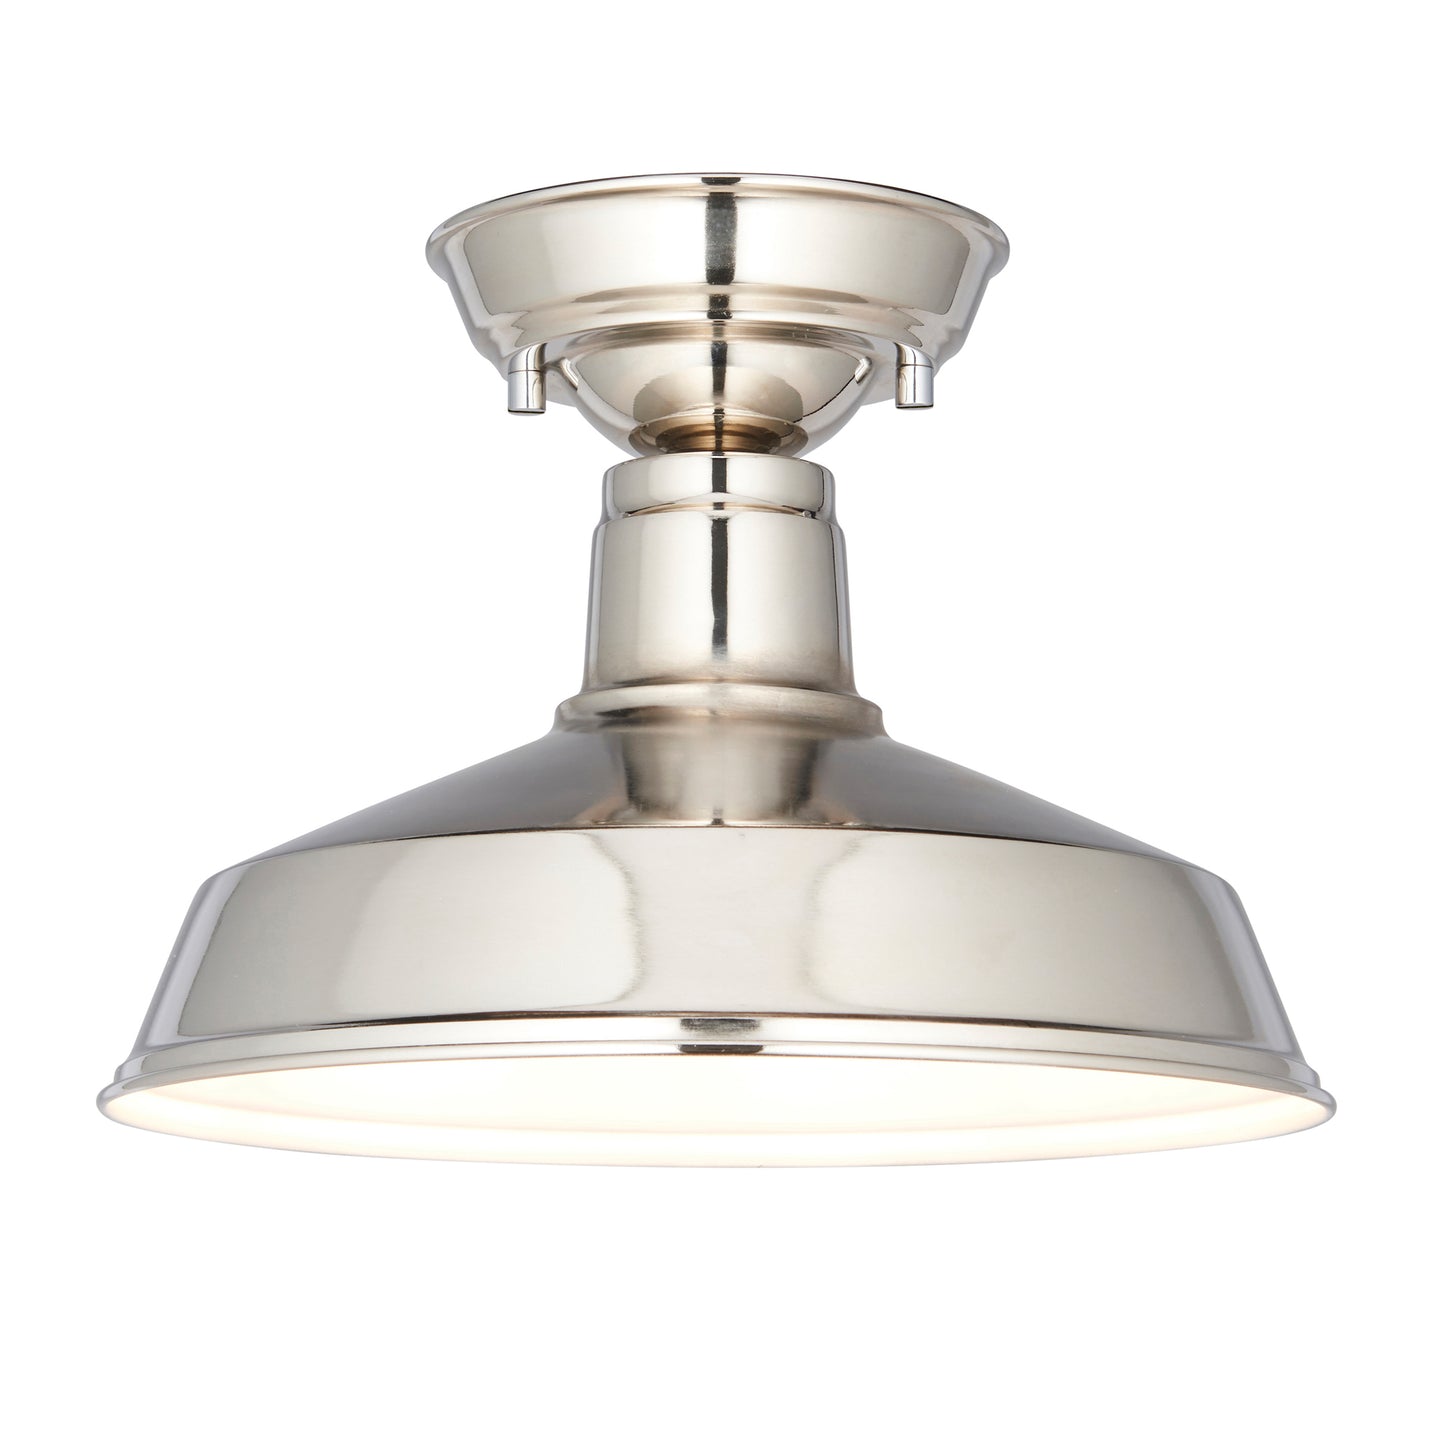 Load image into Gallery viewer, A Darton 1 Ceiling Light with a chrome finish for interior decor from Kikiathome.co.uk.
